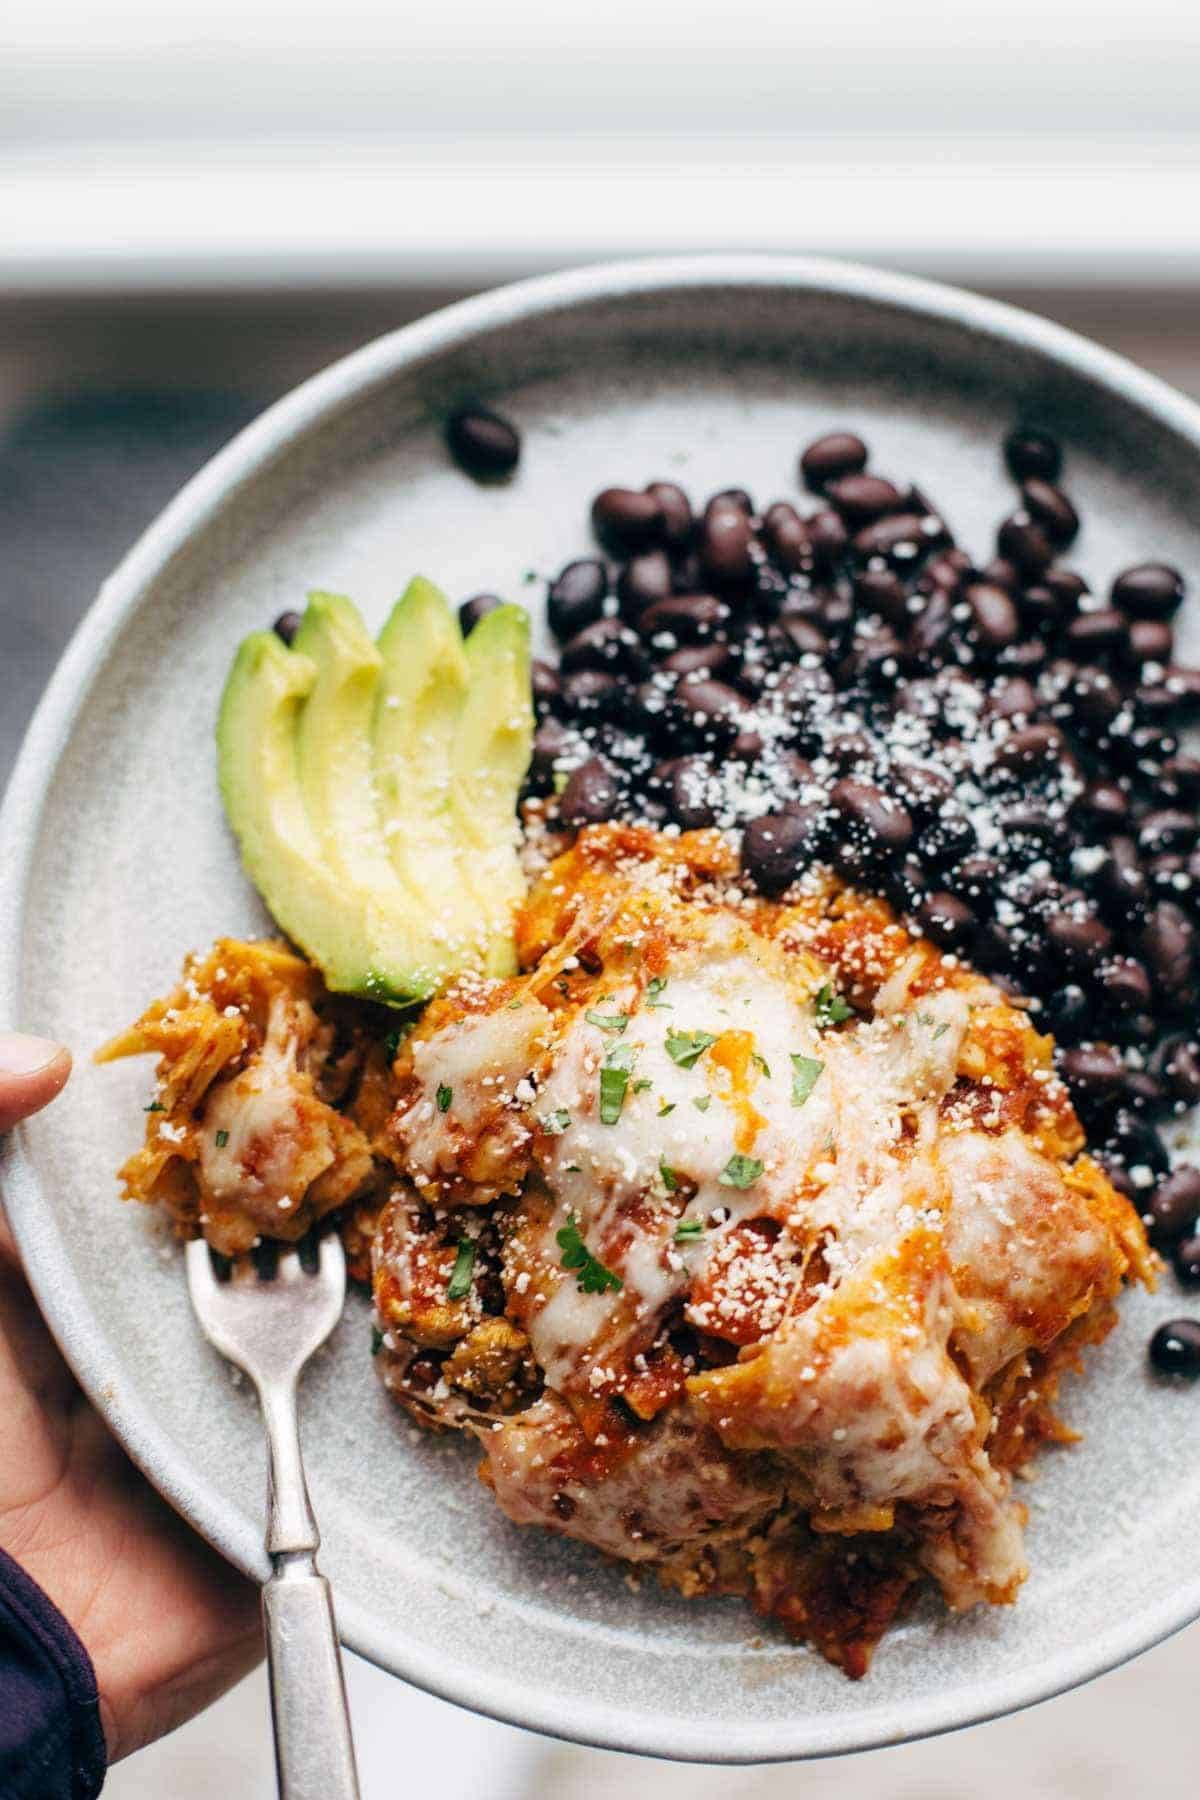 Sofritas casserole with avocado and black beans on a plate with a fork.